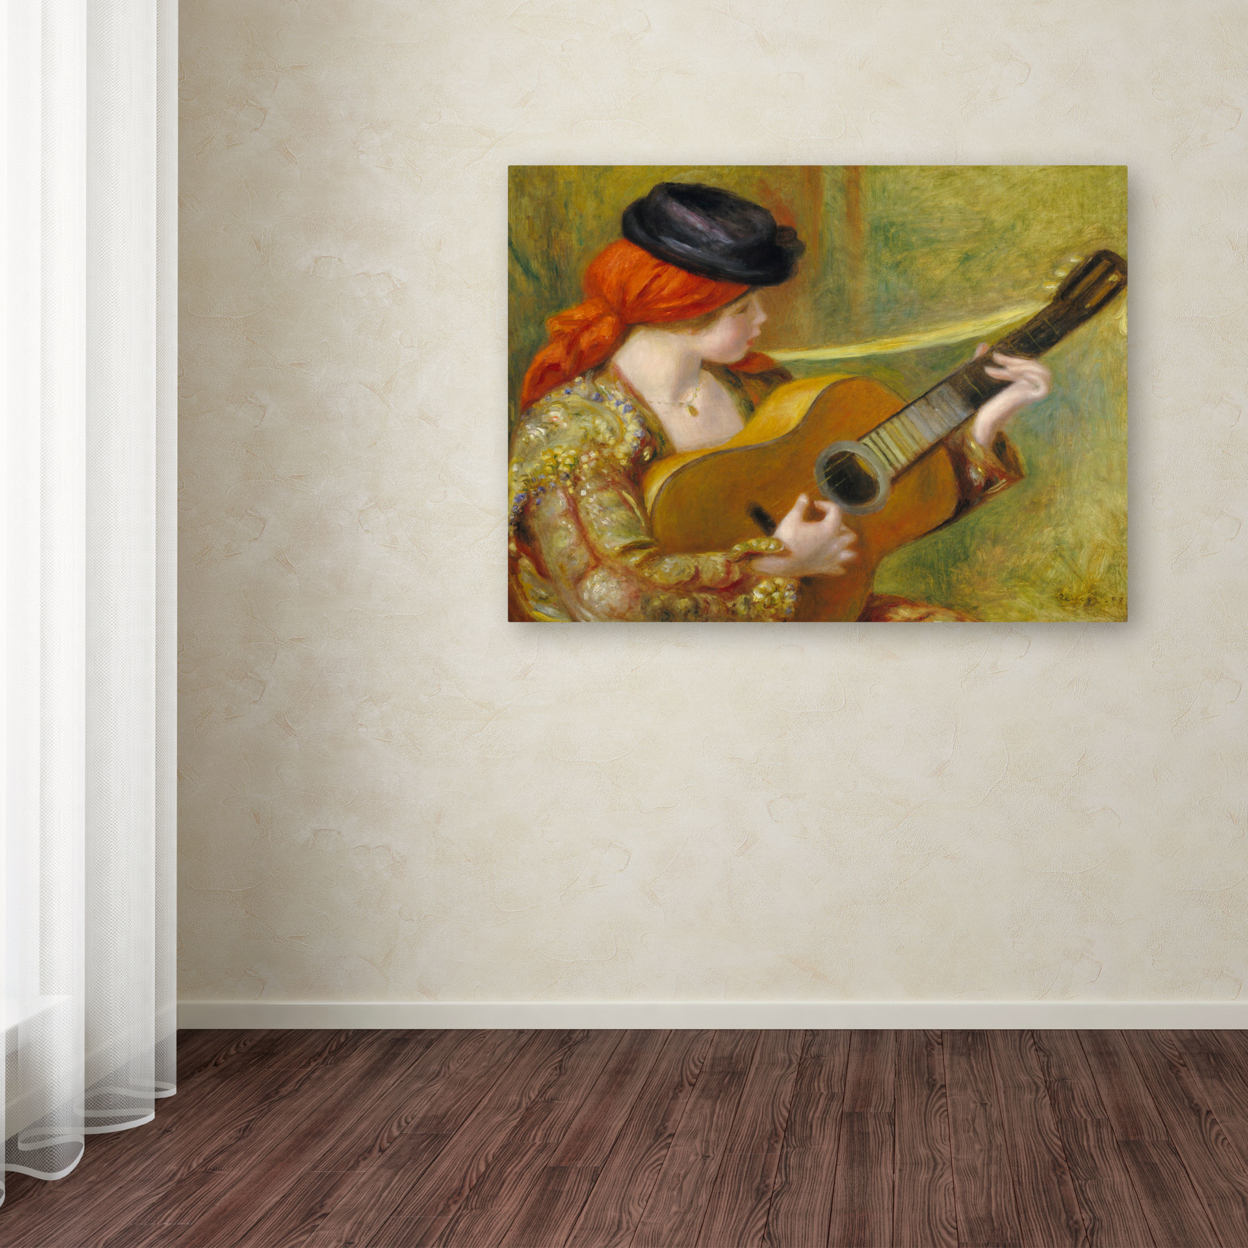 Pierre Renoir 'Young Spanish Woman With A Guitar' Canvas Wall Art 35 X 47 Inches